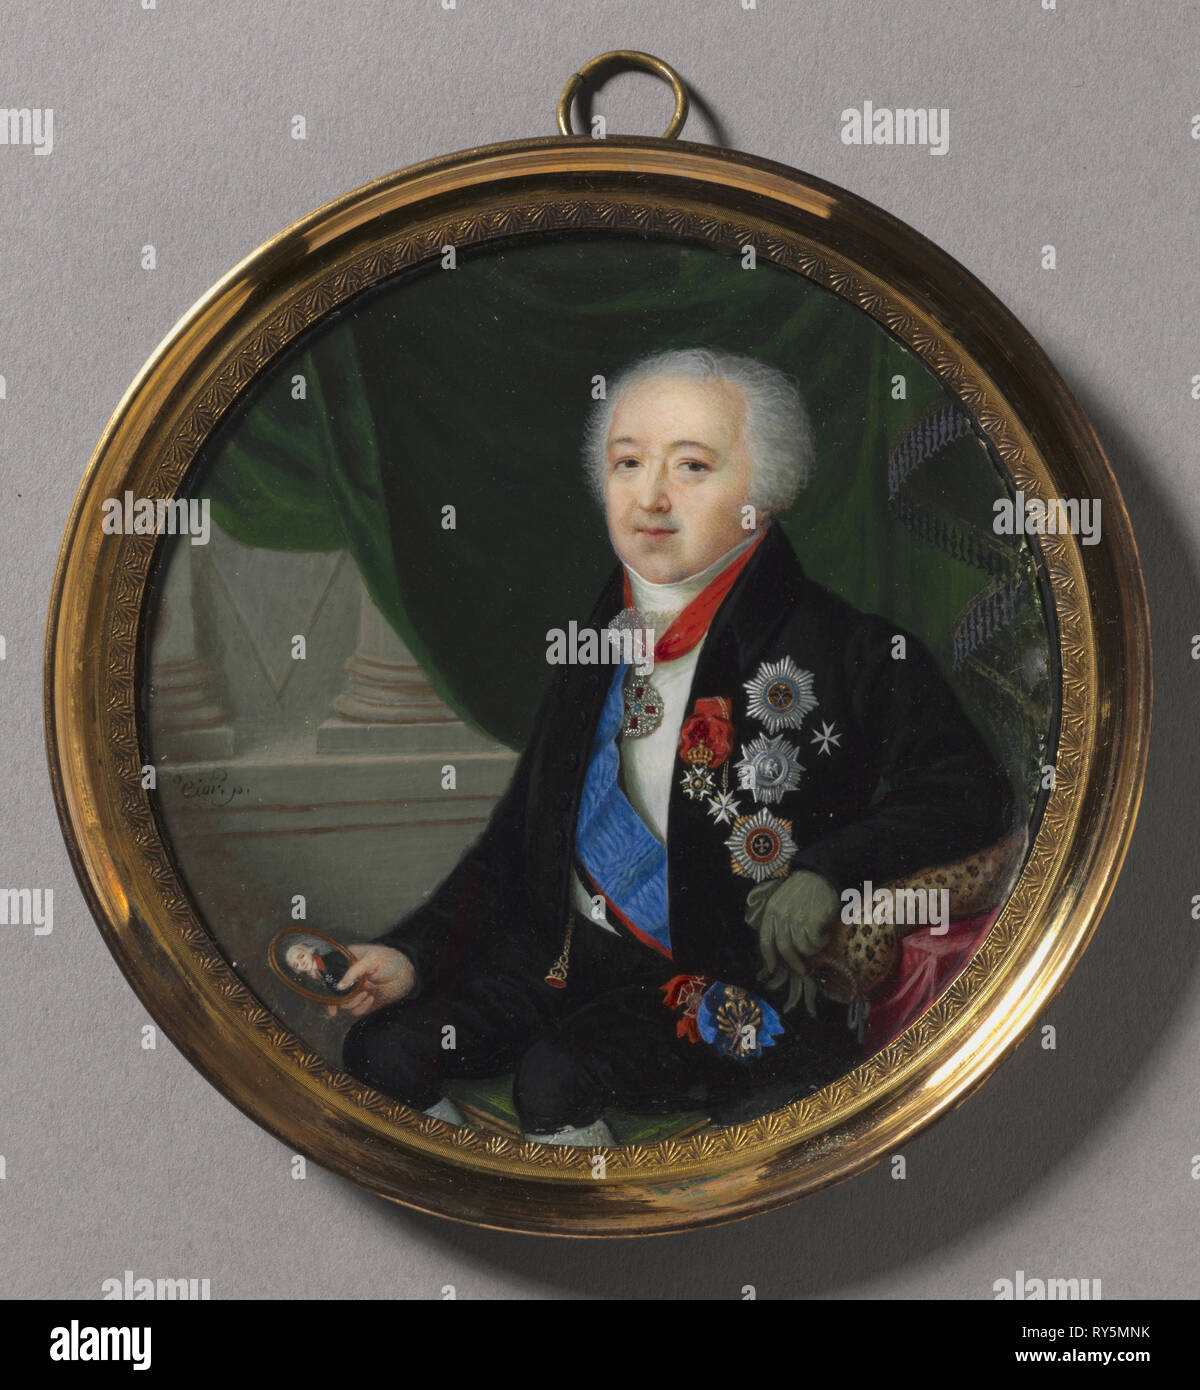 Portrait of Prince Alexander Bezborodko, mid to late 1700s. Pierre-Charles Cior (French, 1769-1840). Watercolor on ivory in a 19th-century gilt metal frame; diameter: 8.6 cm (3 3/8 in.); diameter of frame: 10.2 cm (4 in Stock Photo